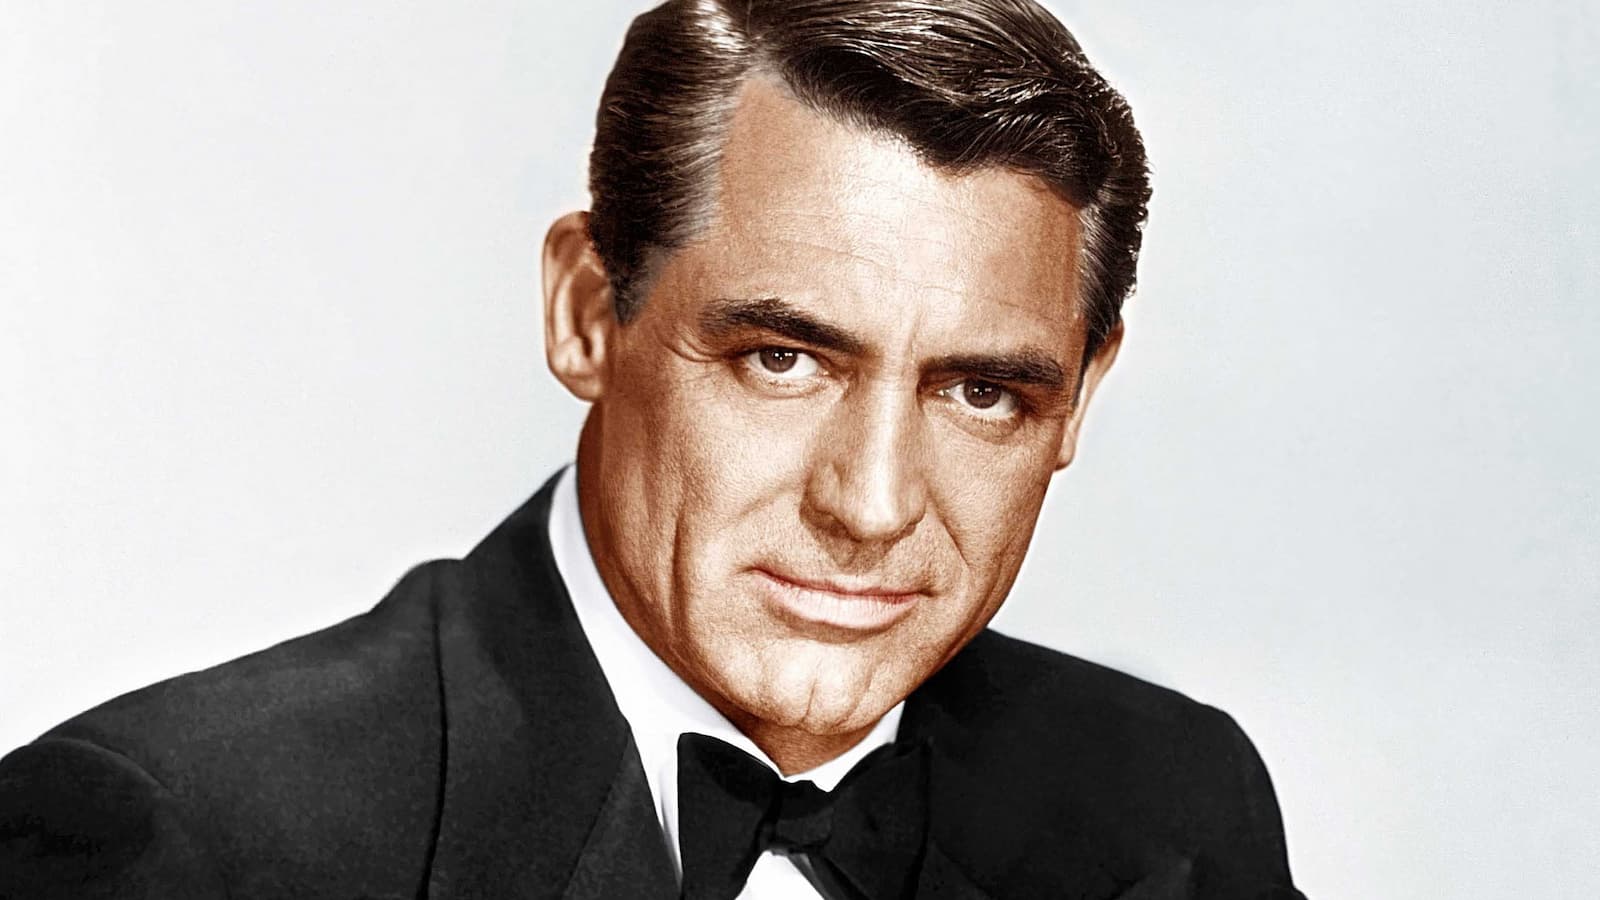 Cary Grant Biography, Cary Grant marriage, Cary Grant movies, Cary Grant net worth, Cary Grant